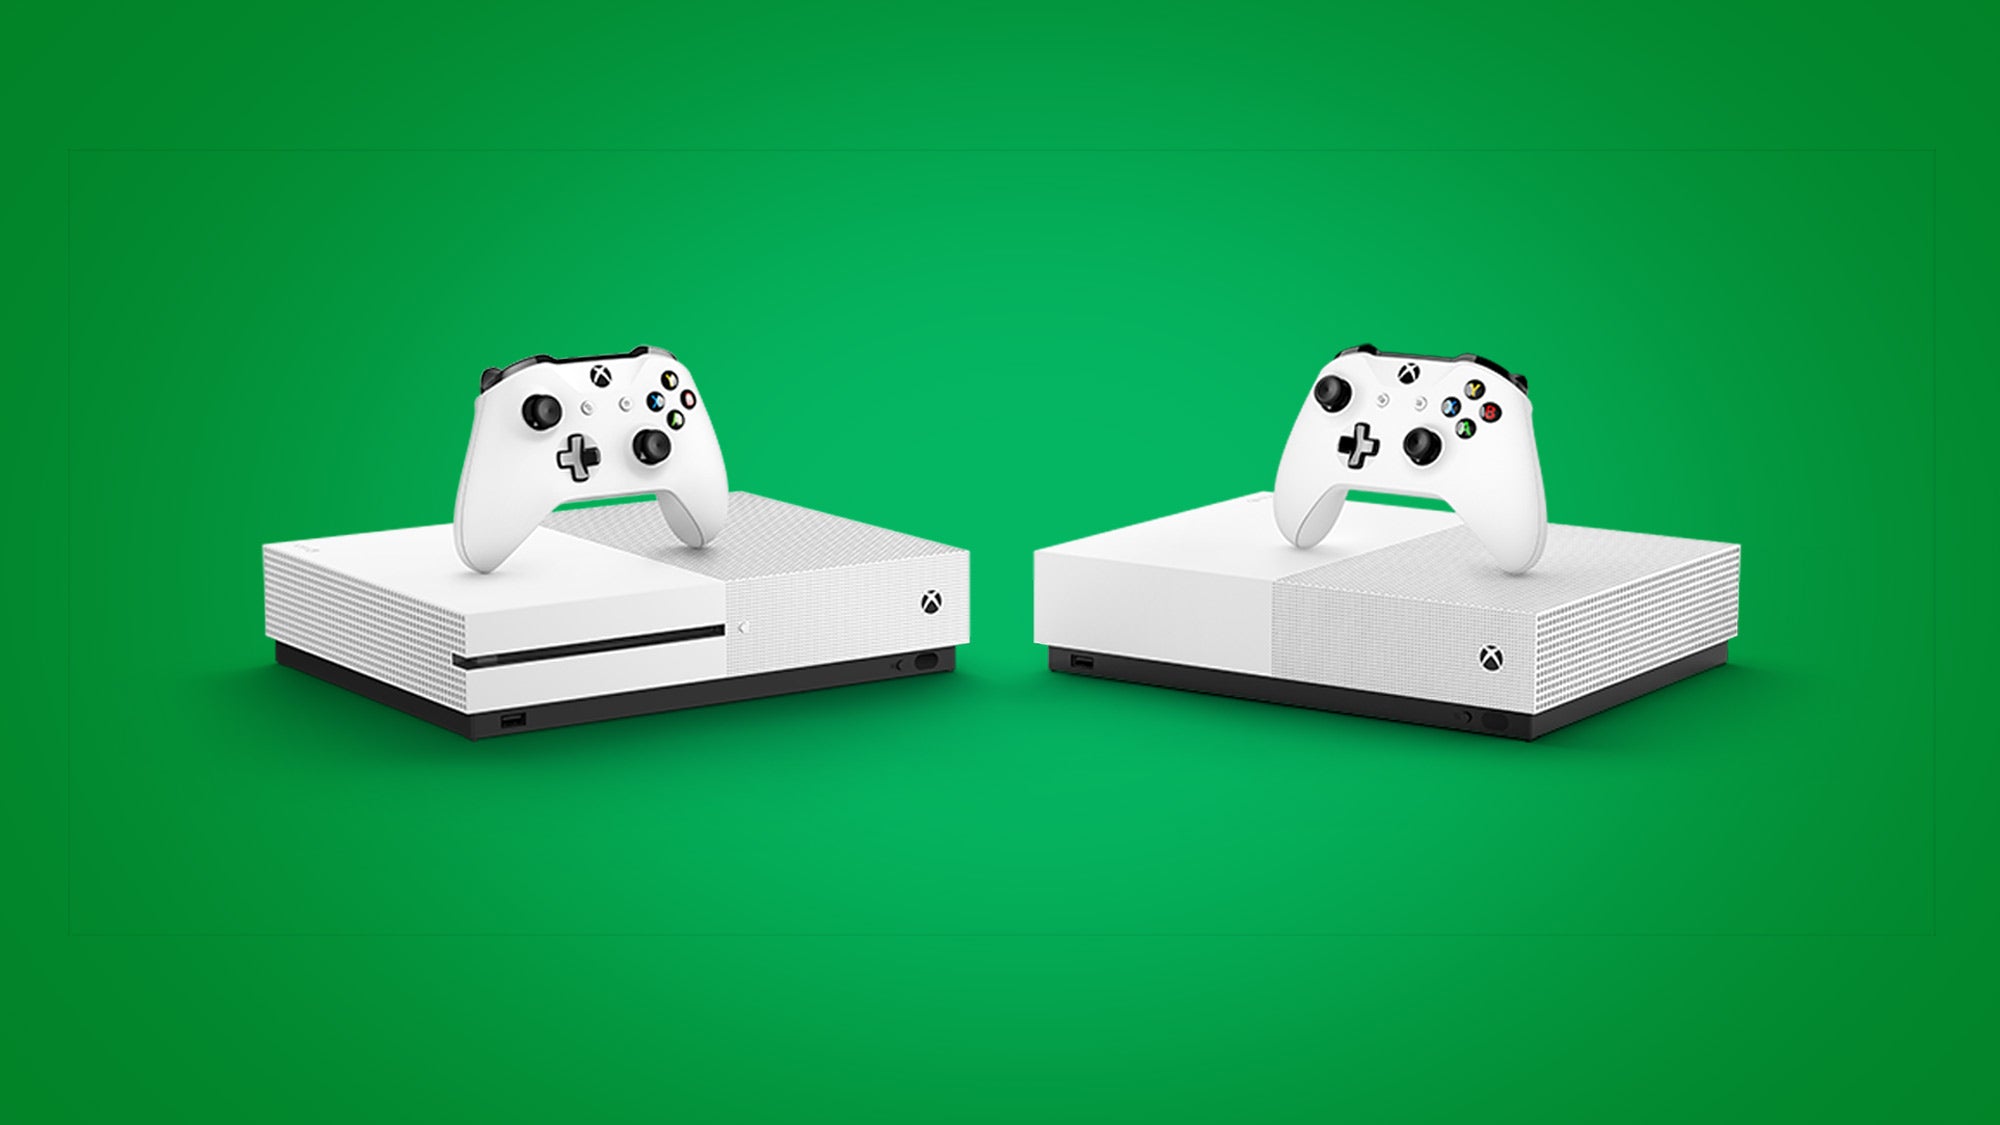 How Much Is Xbox One Online Uk?